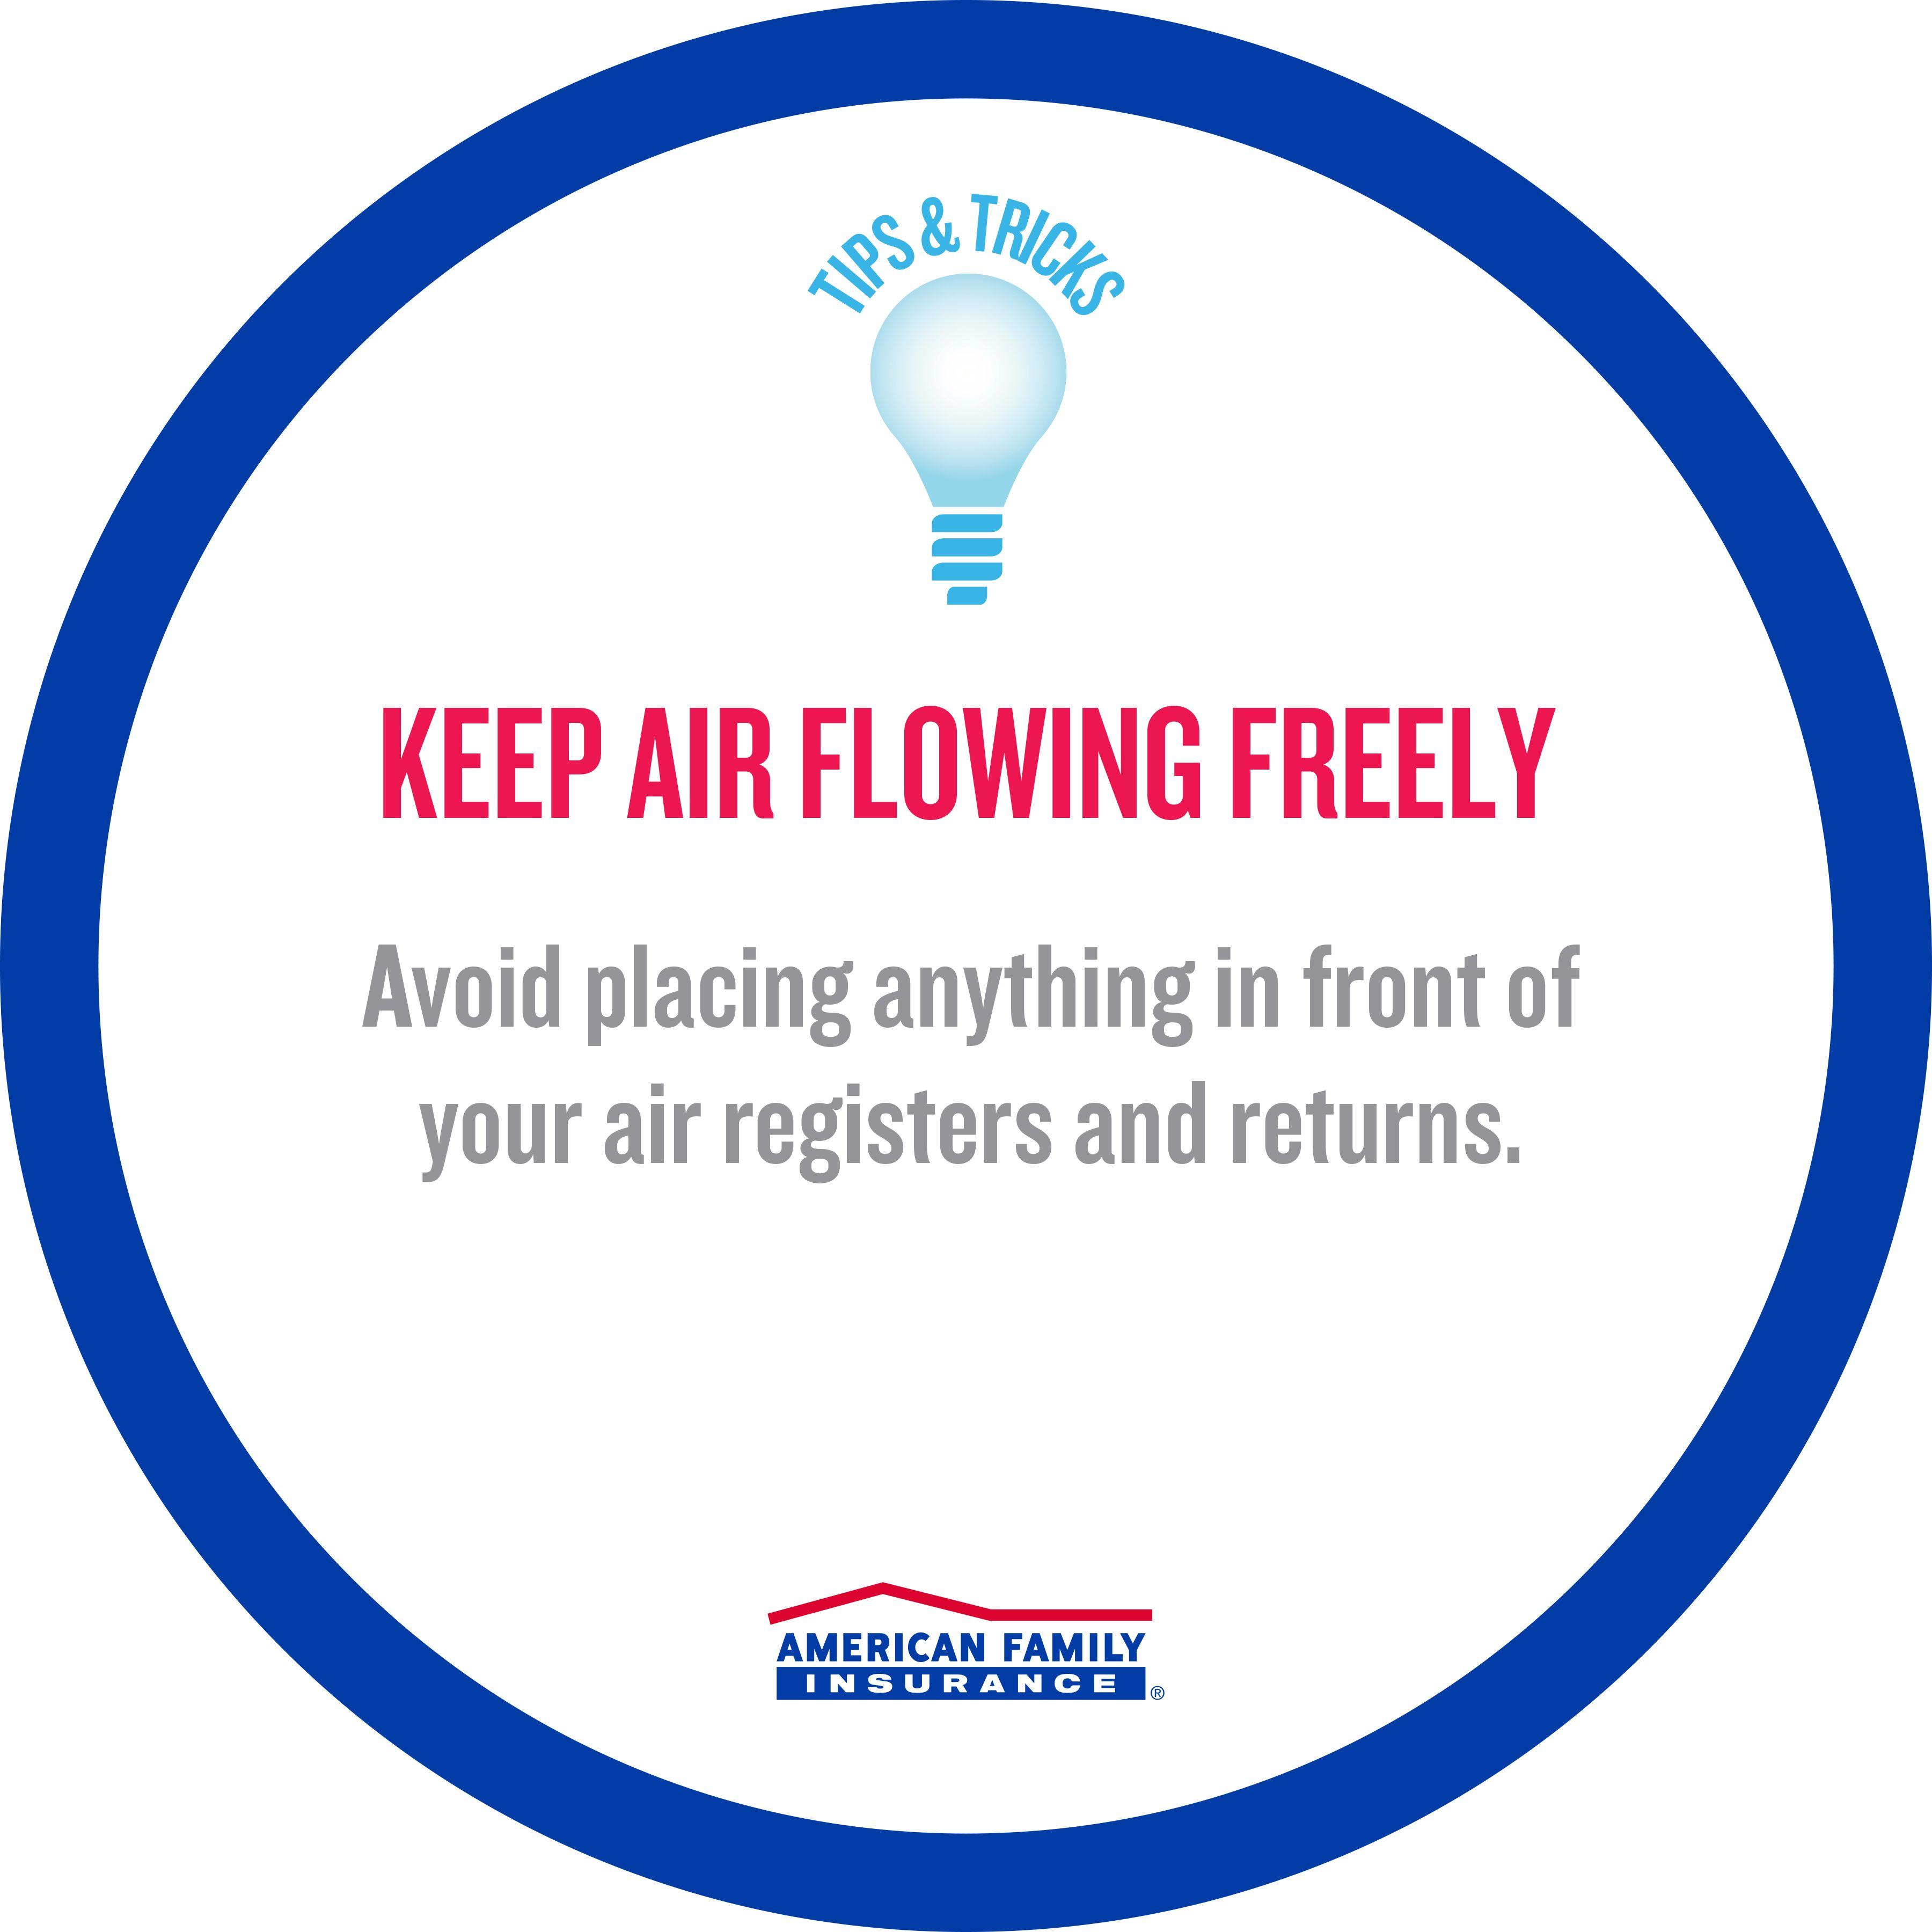 AmFam Roof Logo - American Family Insurance Tips & Trends: Keep Air Flowing Freely